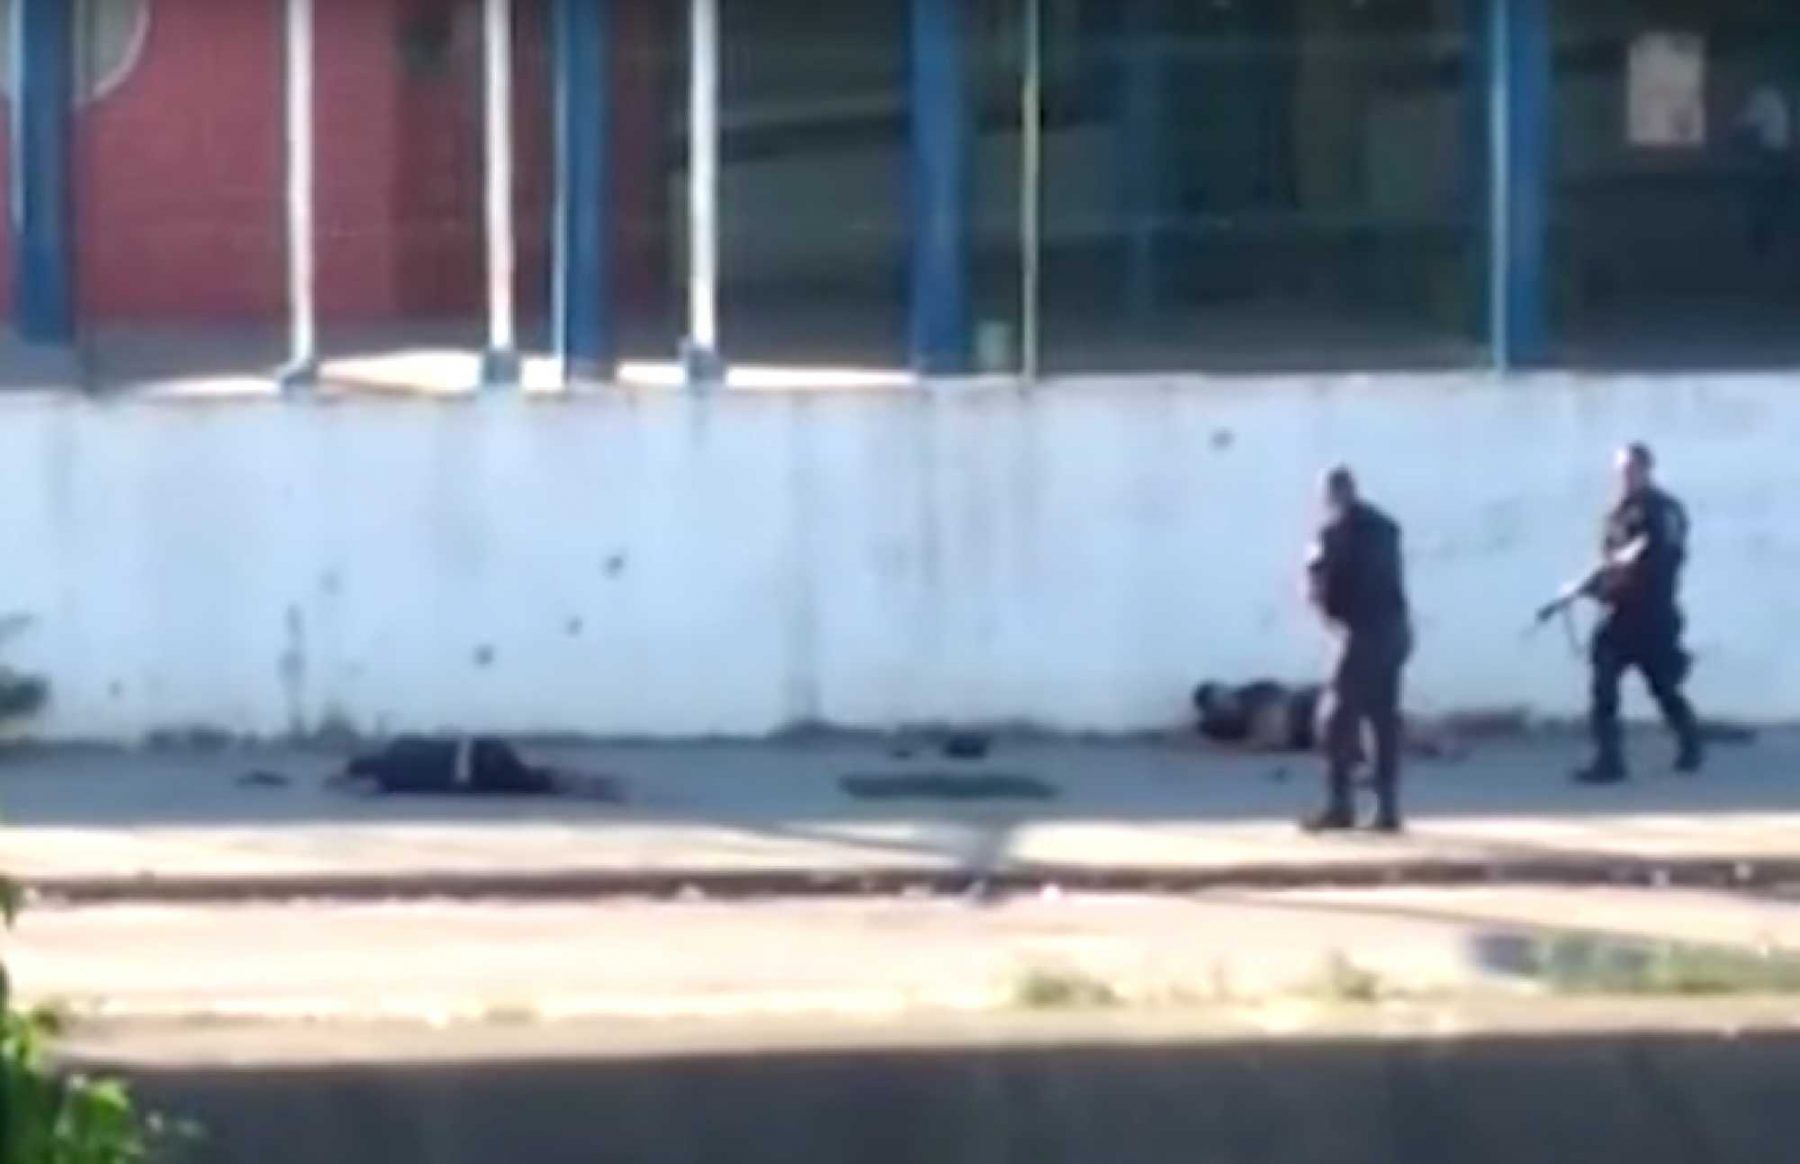 Video shows Rio police executing a man on the ground - Image from YouTube video